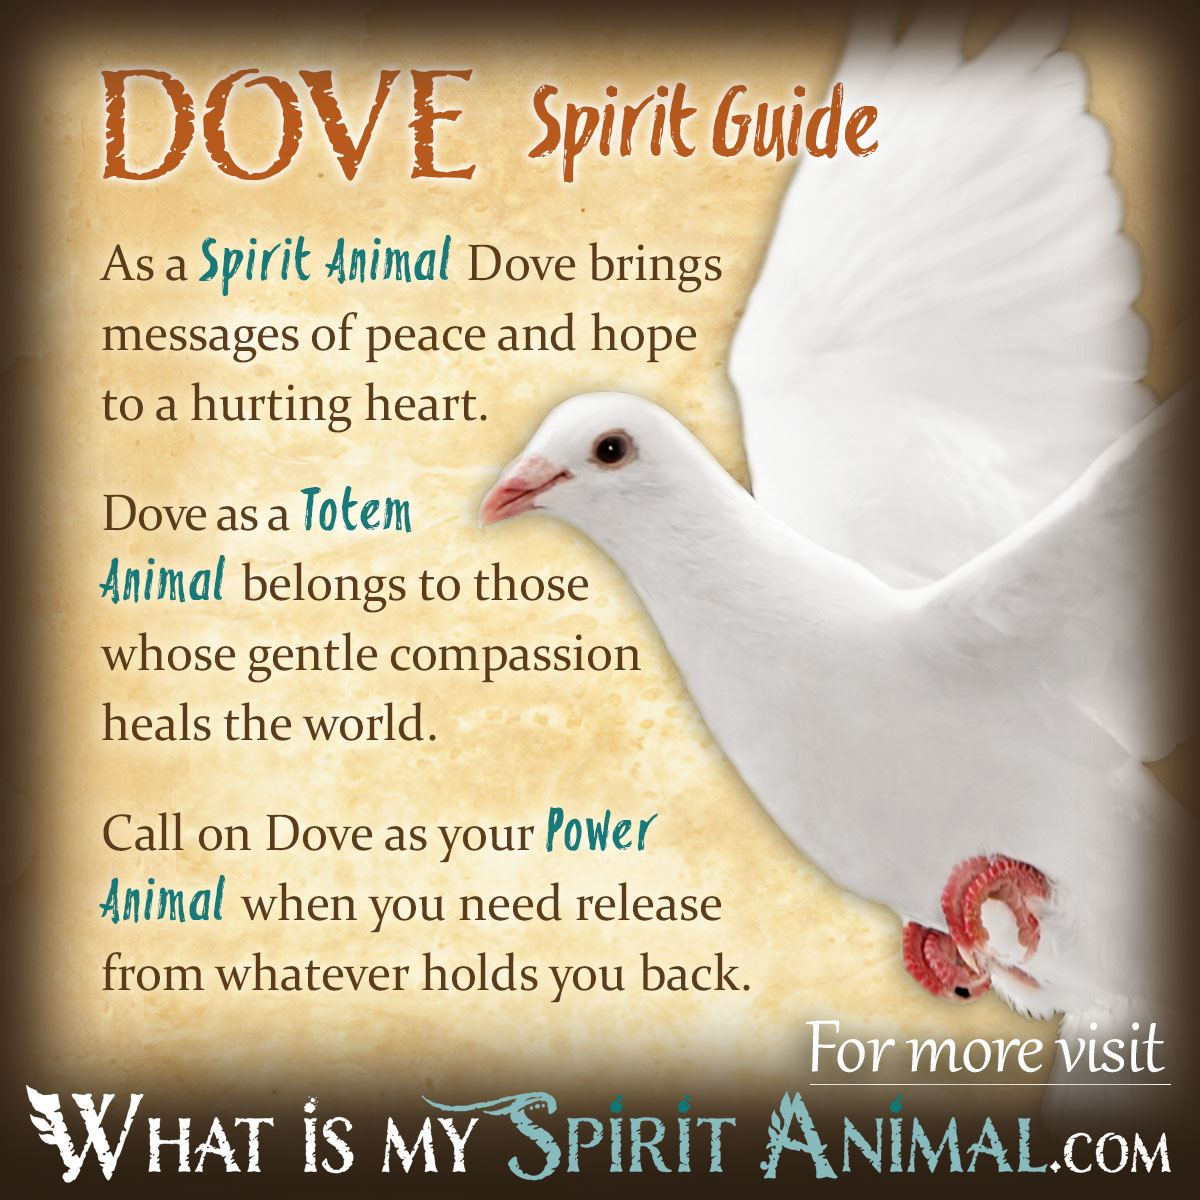 What is the symbolic meaning of a dove?